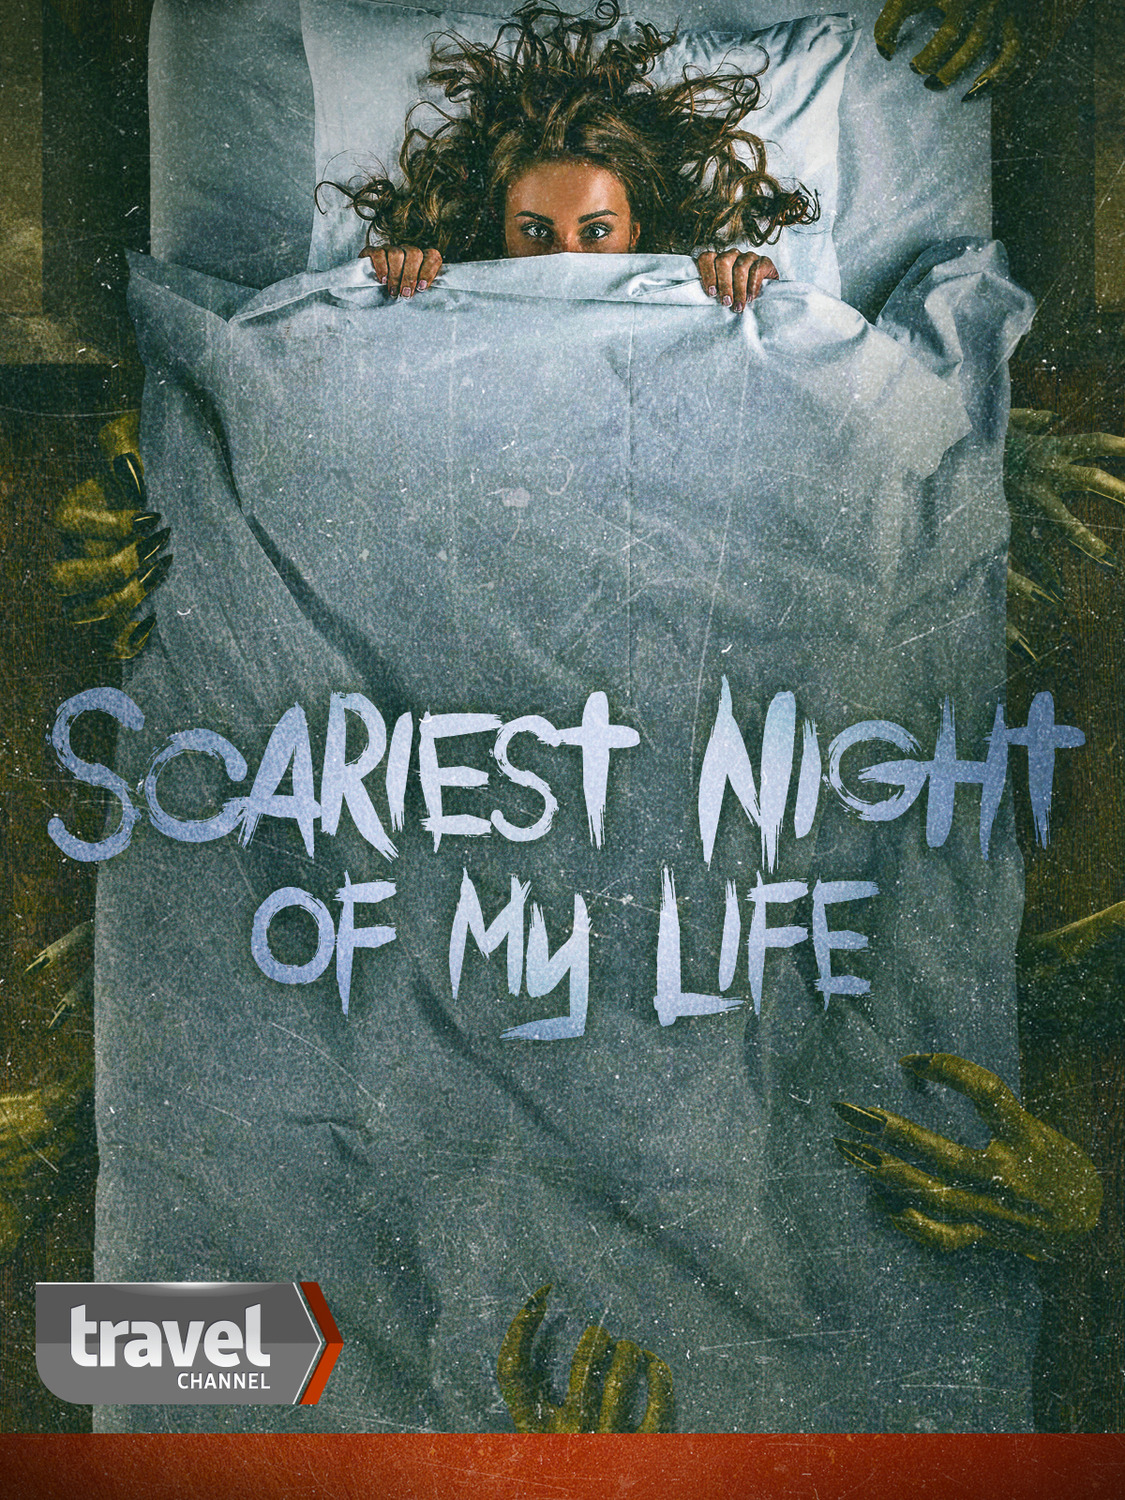 Extra Large TV Poster Image for Scariest Night of My Life 